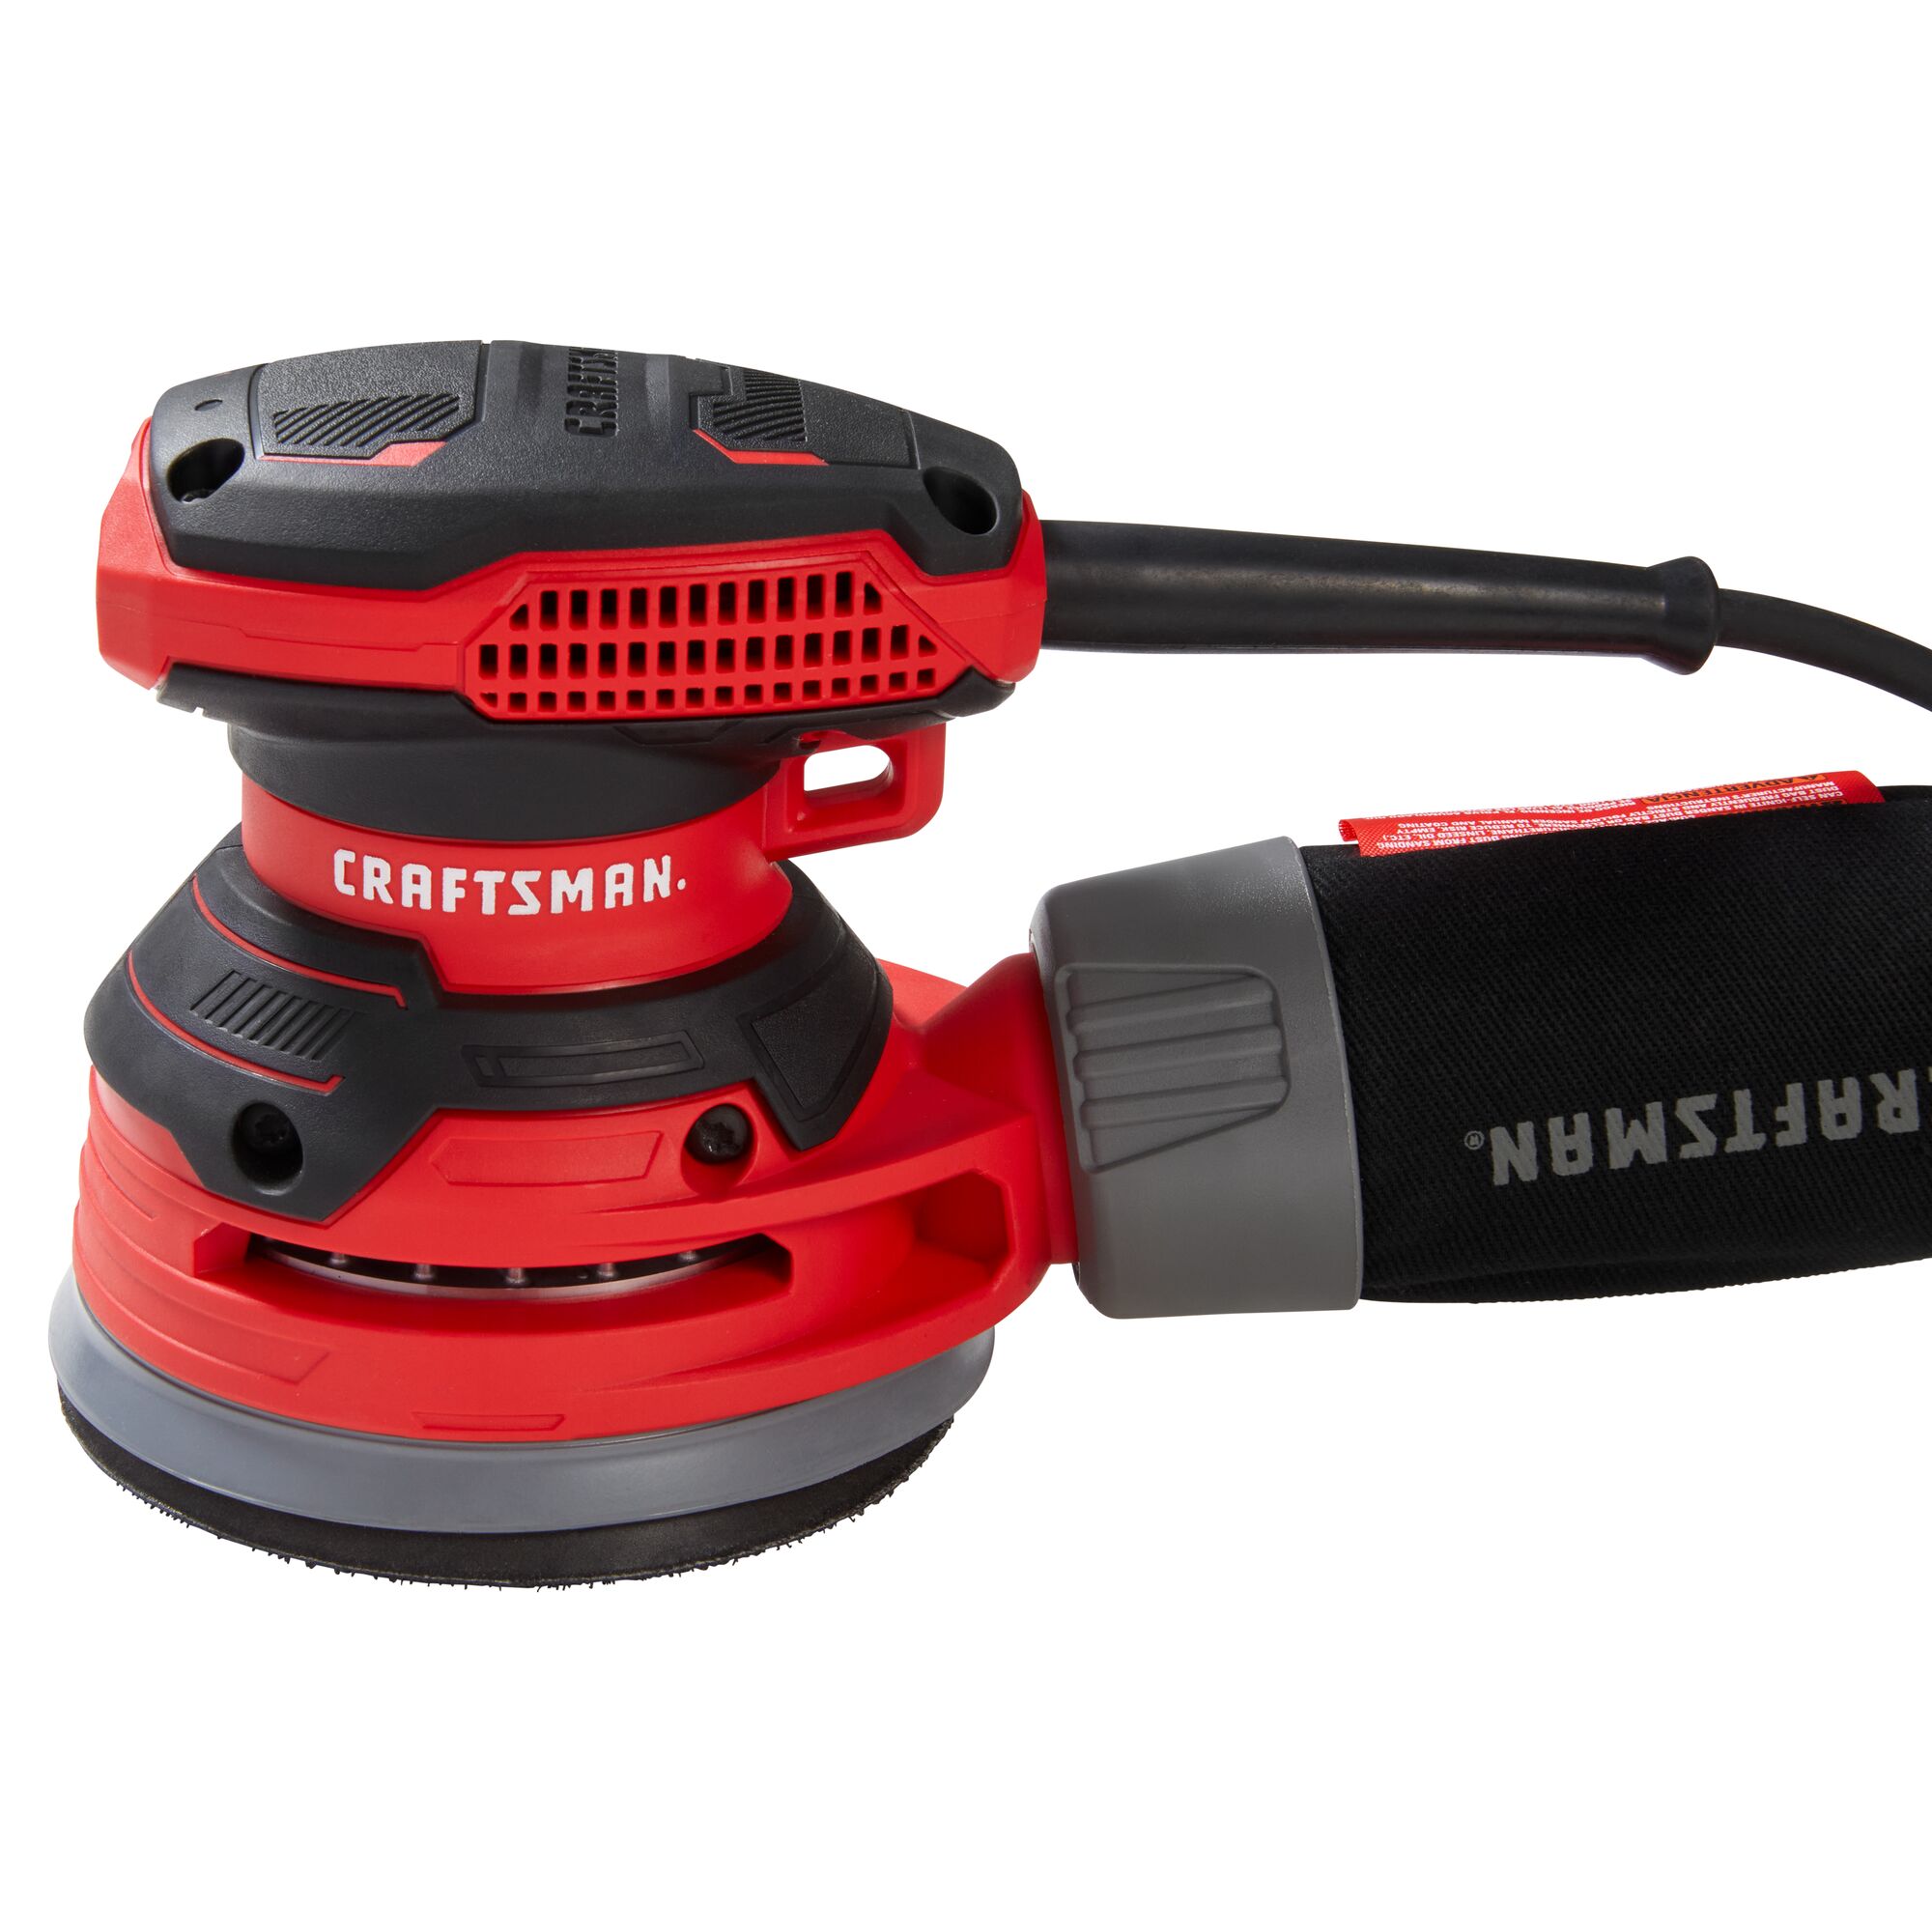 View of CRAFTSMAN Sander highlighting product features